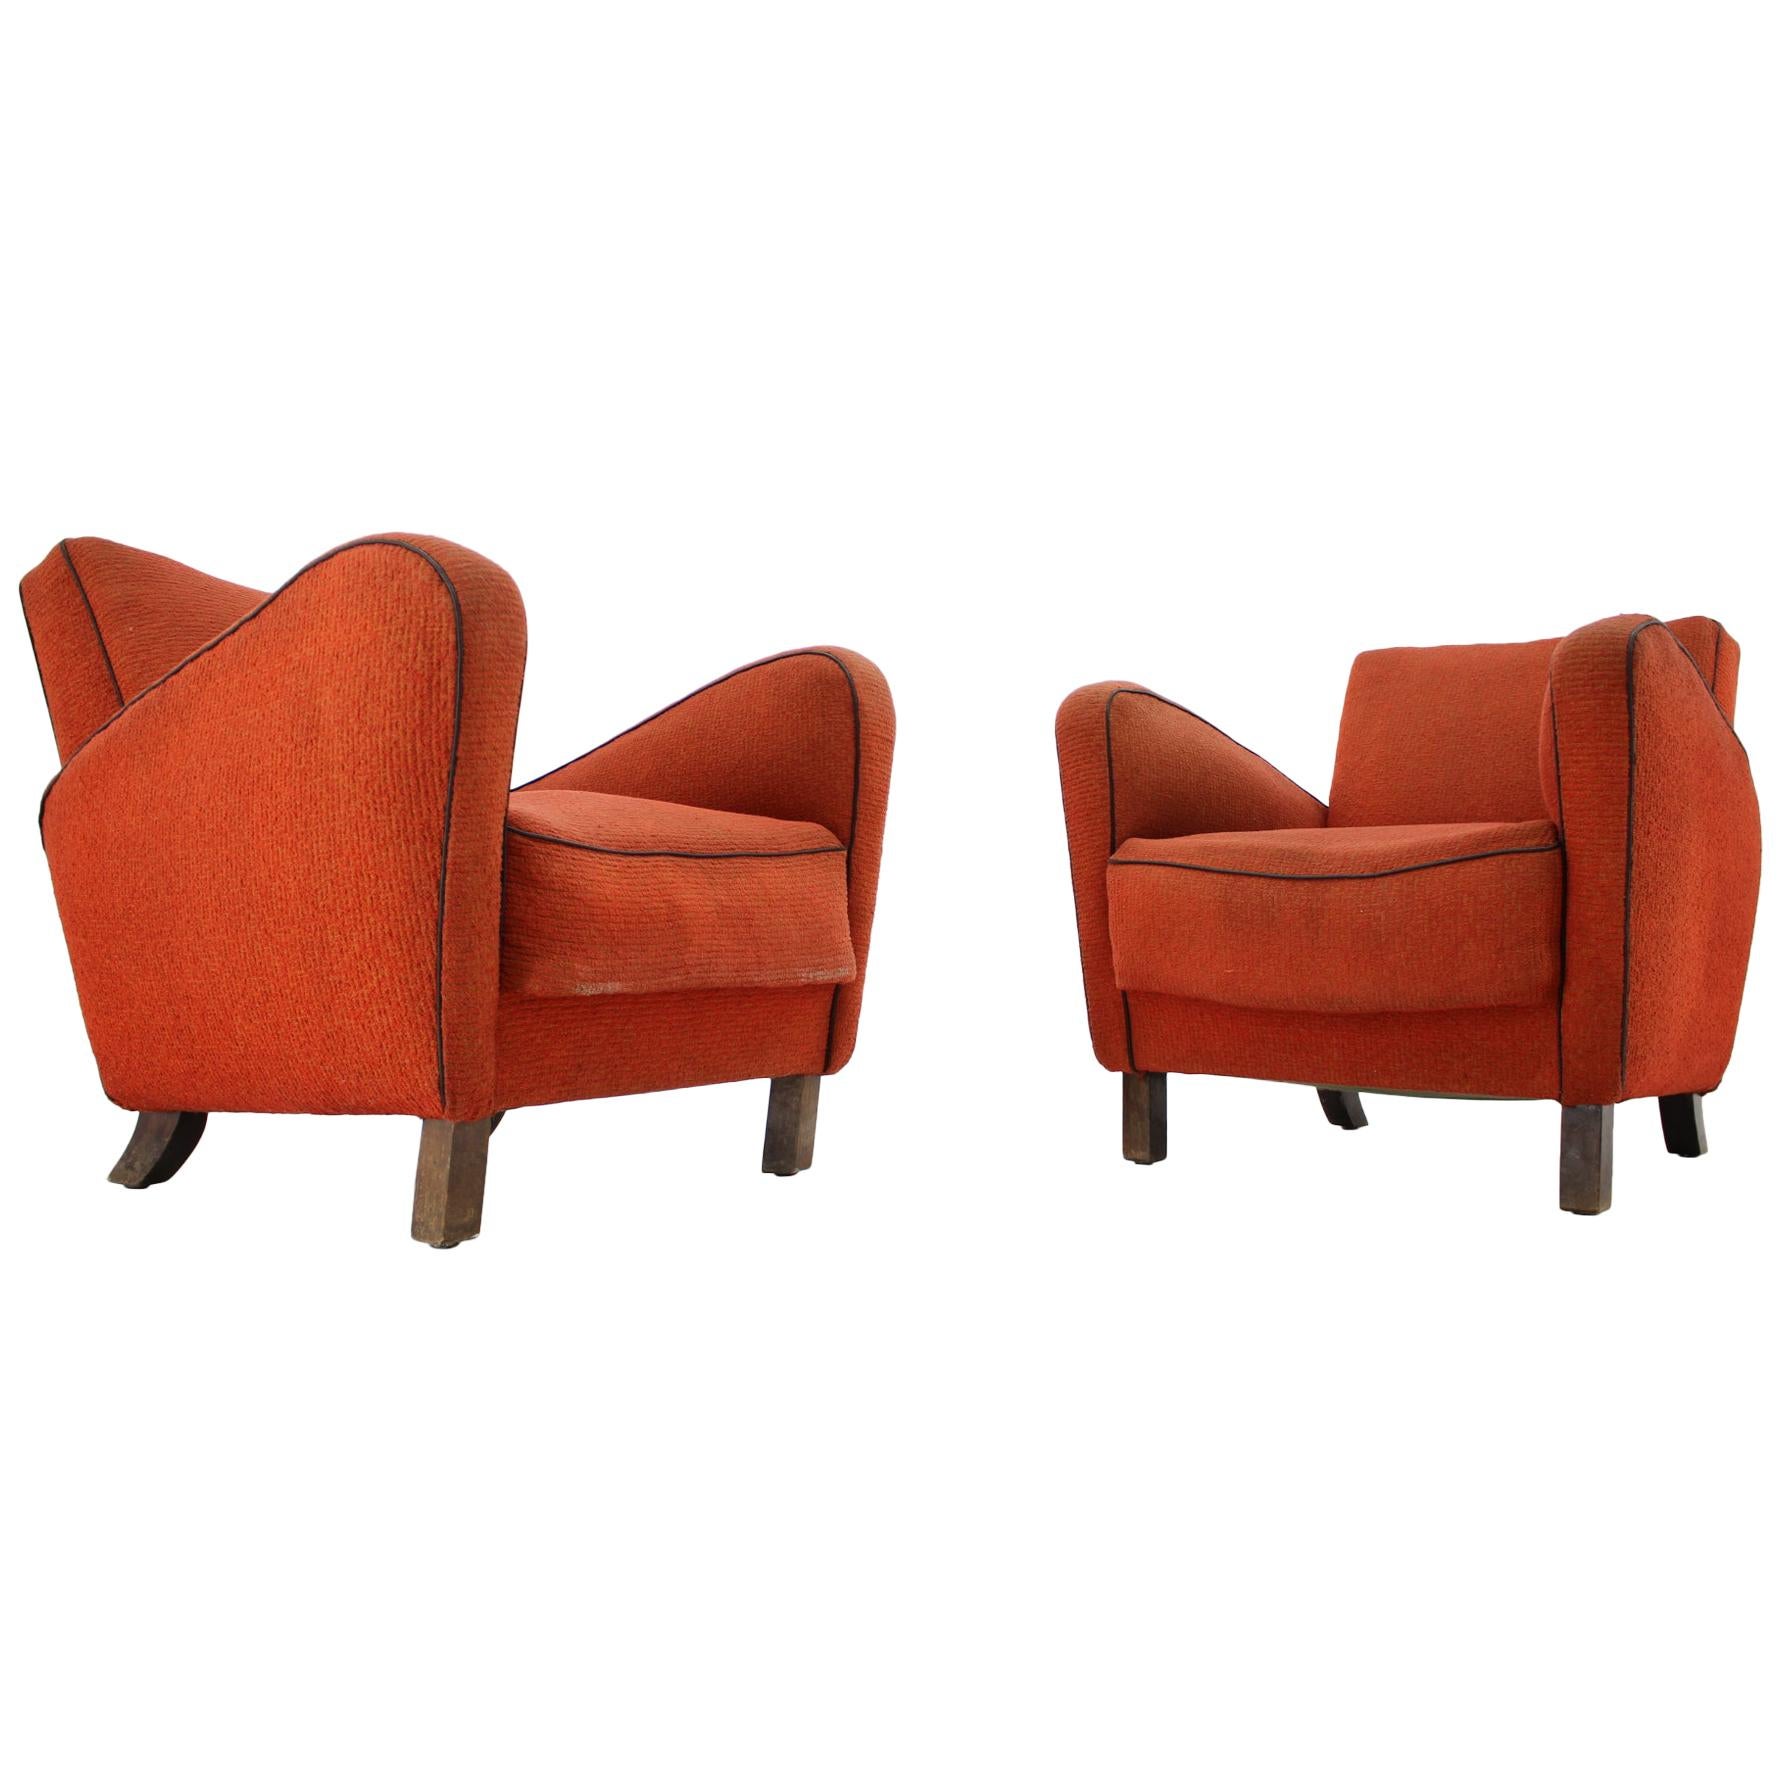 Set of Two Rare Art Deco Armchairs H-283 by Jindřich Halabala, 1930s